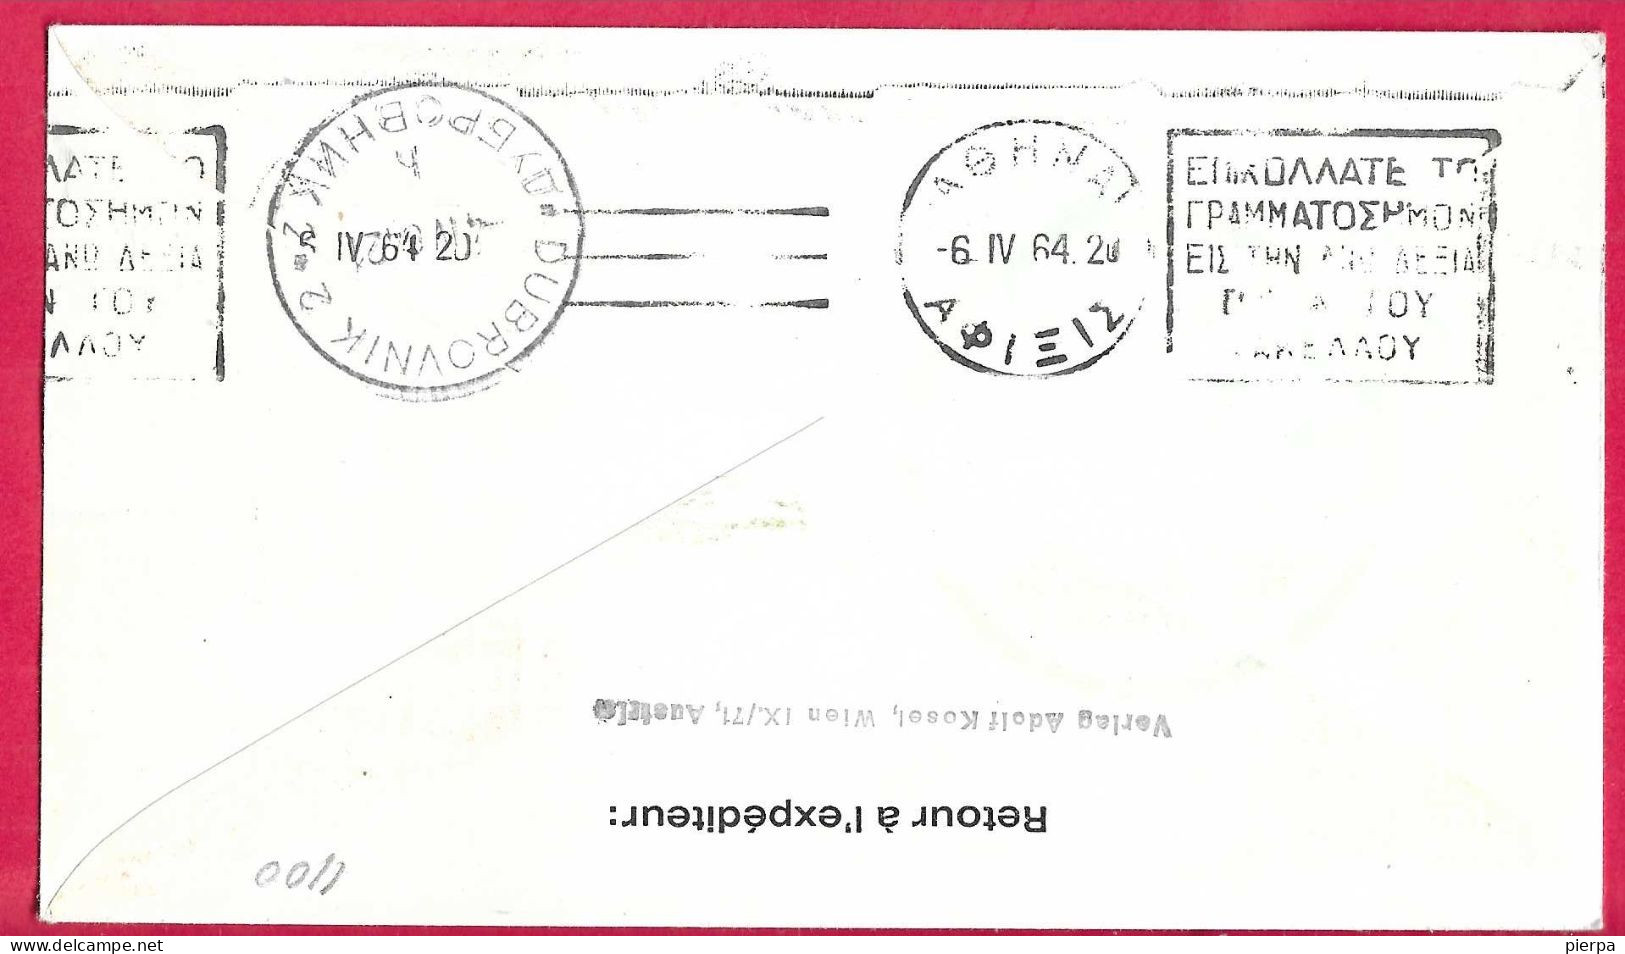 AUSTRIA - FIRST CARAVELLE FLIGHT AUA FROM WIEN/DUBROVNIK TO ATHENS *4.4.1964* ON OFFICIAL COVER - Premiers Vols